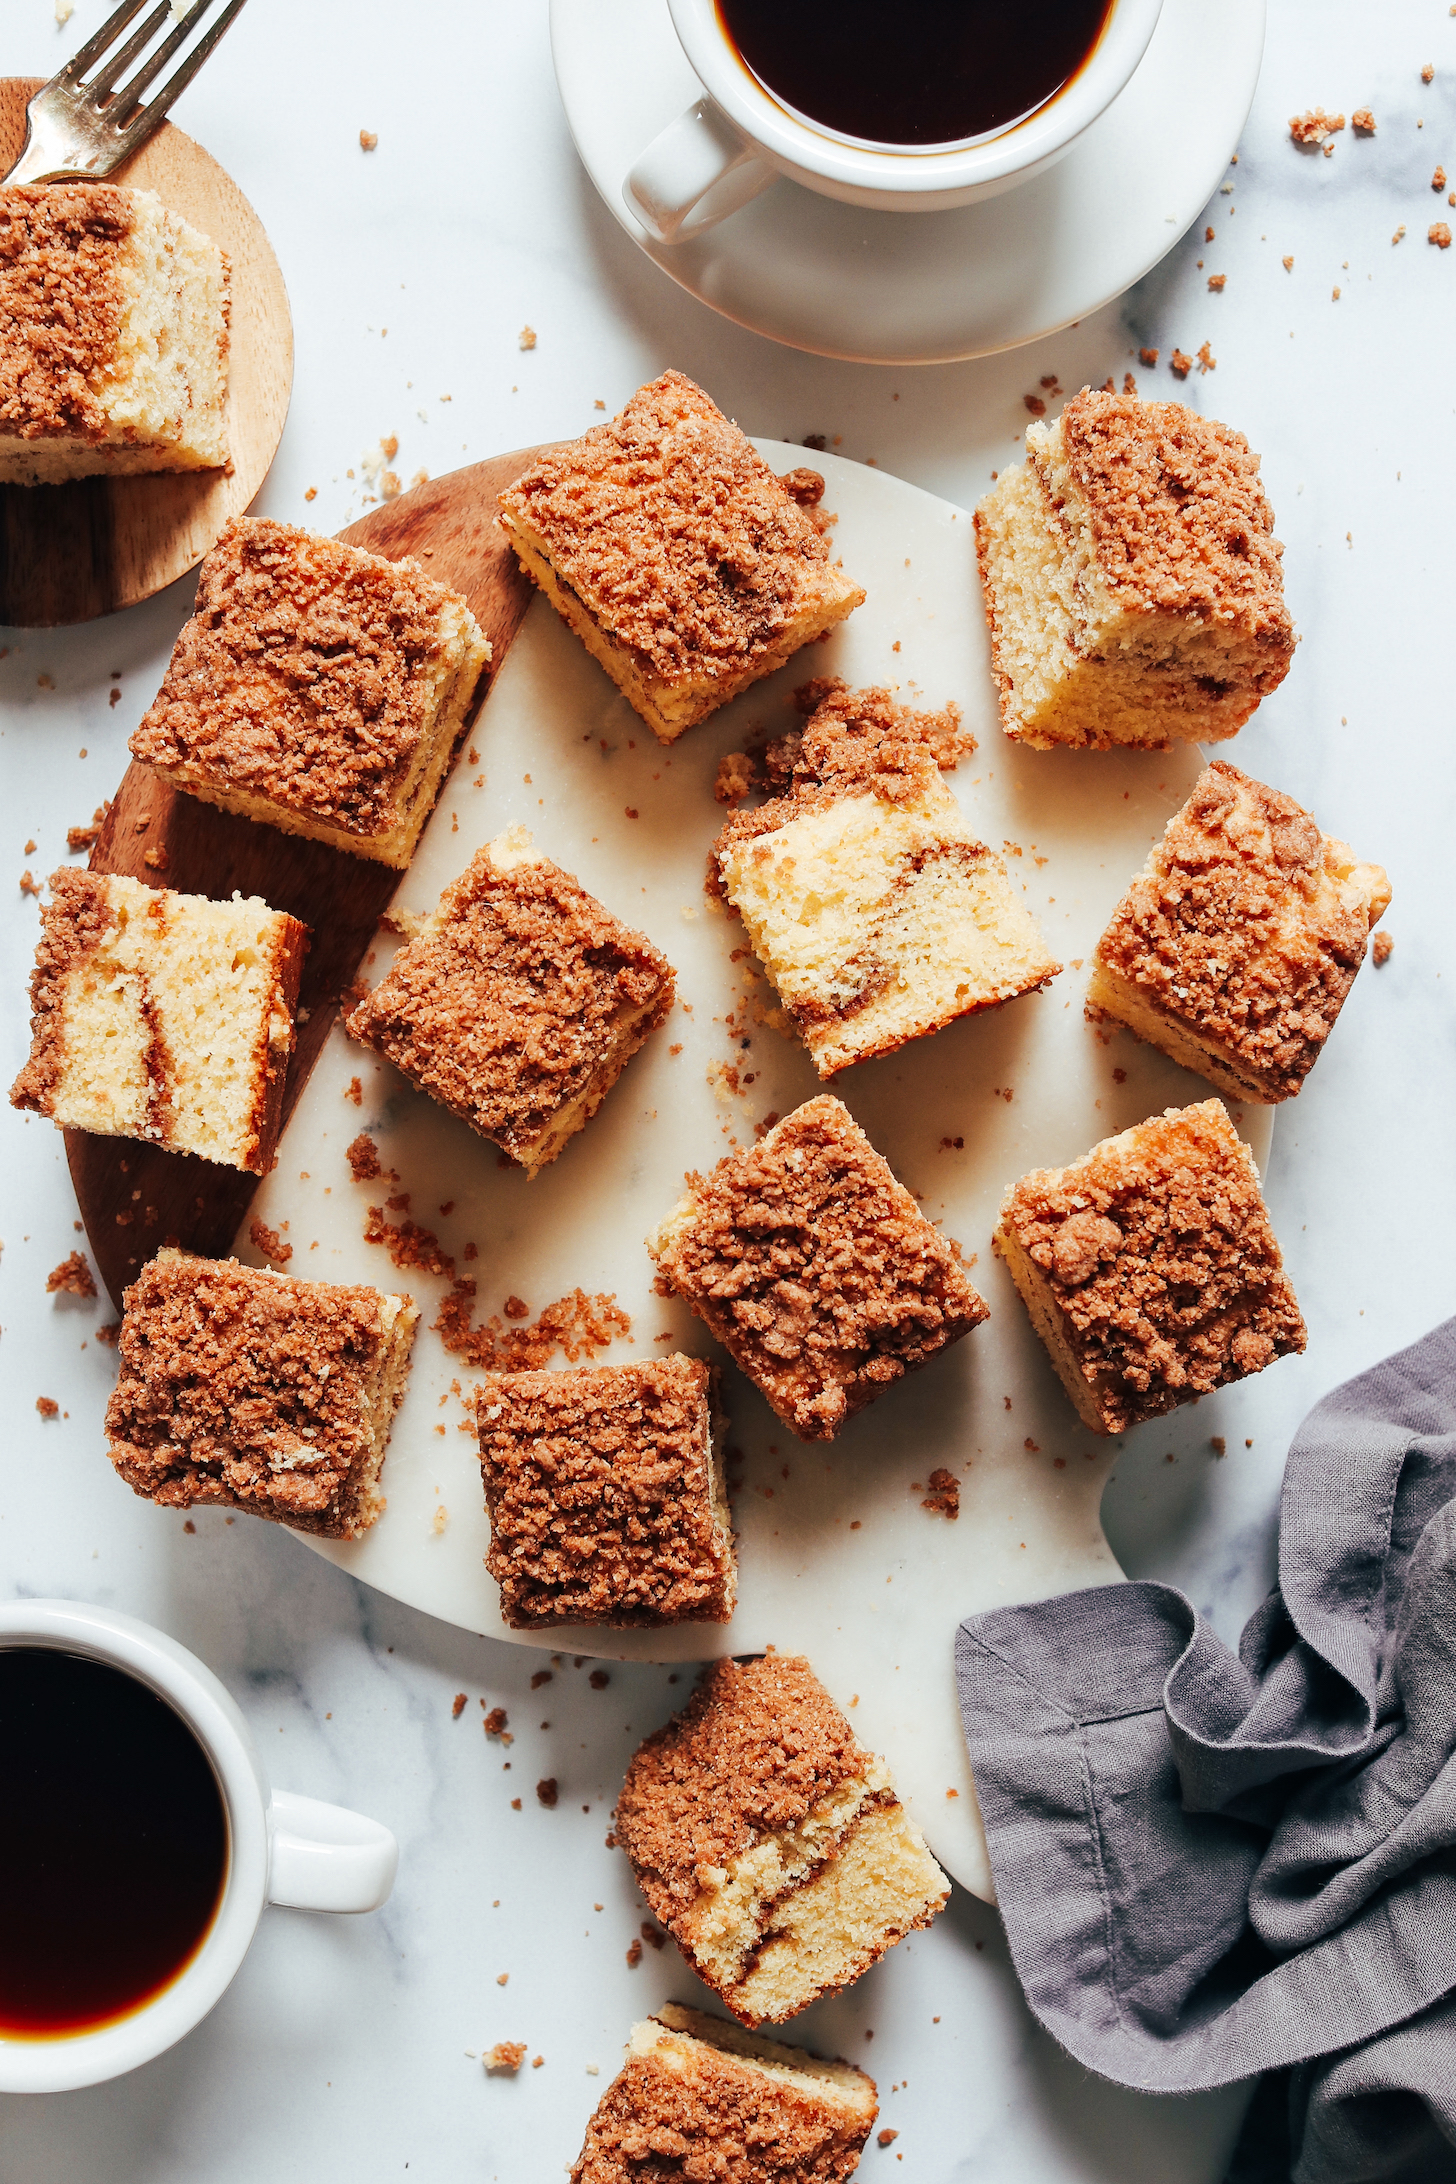 Mugs of coffee next to slices of gluten-free coffee cake